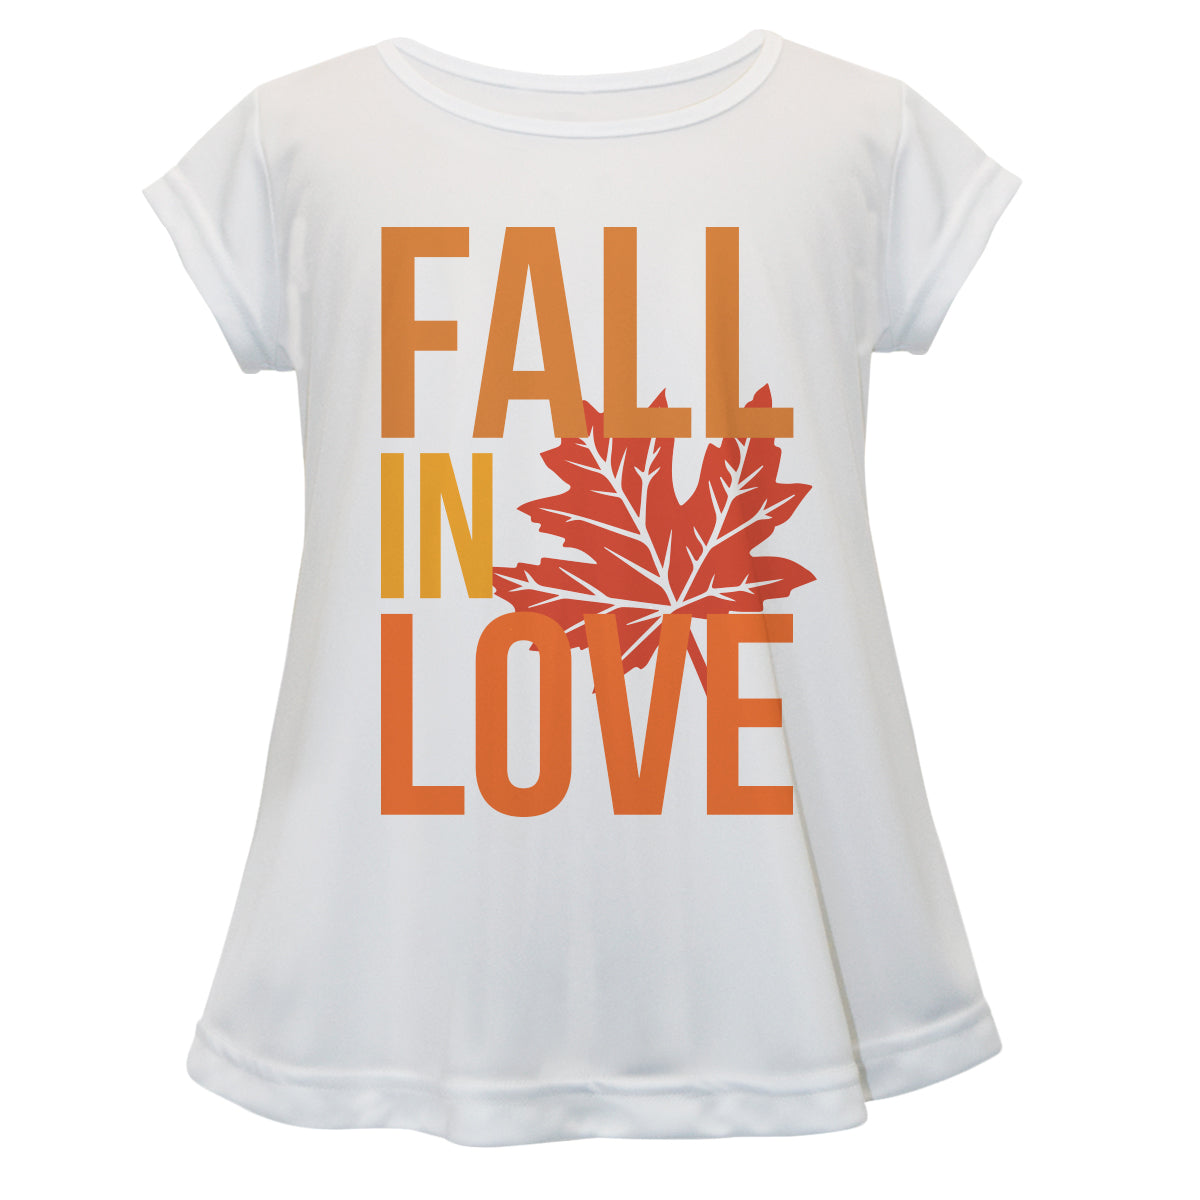 Fall In Love White Short Sleeve Laurie Top